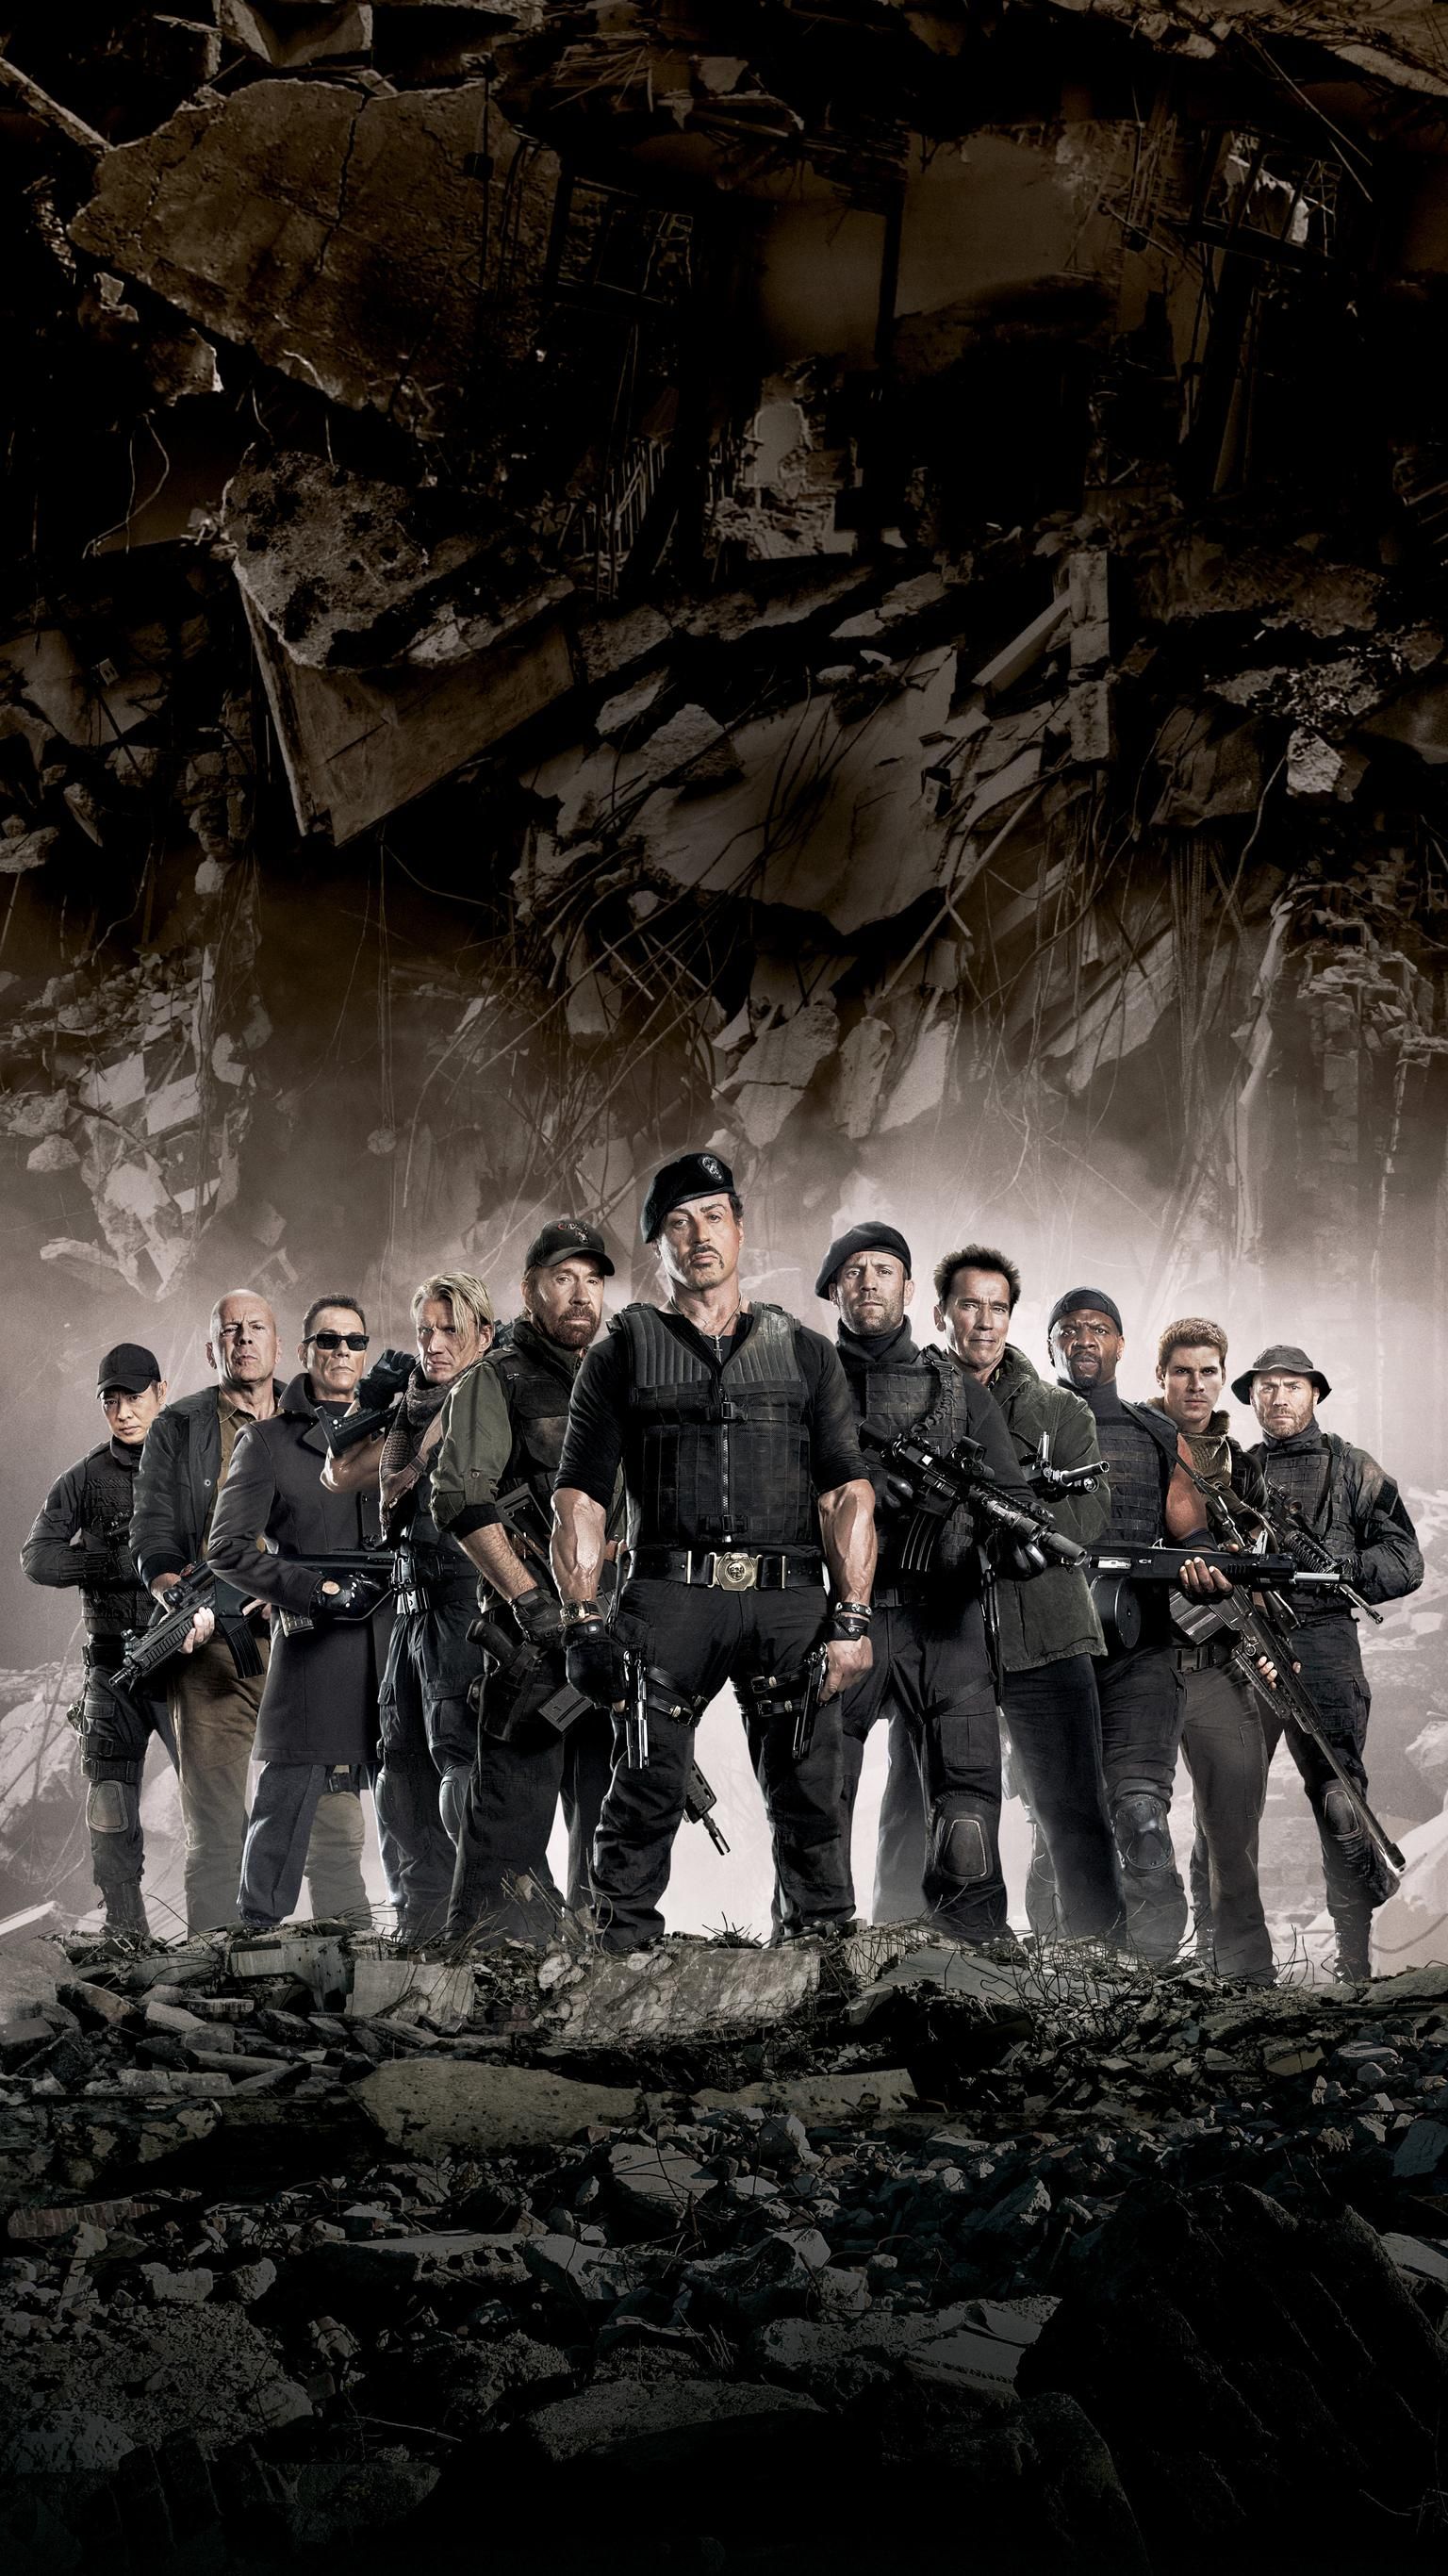 The Expendables 2 (2012) Phone Wallpaper. Moviemania. The expendables, Film prints, Poster